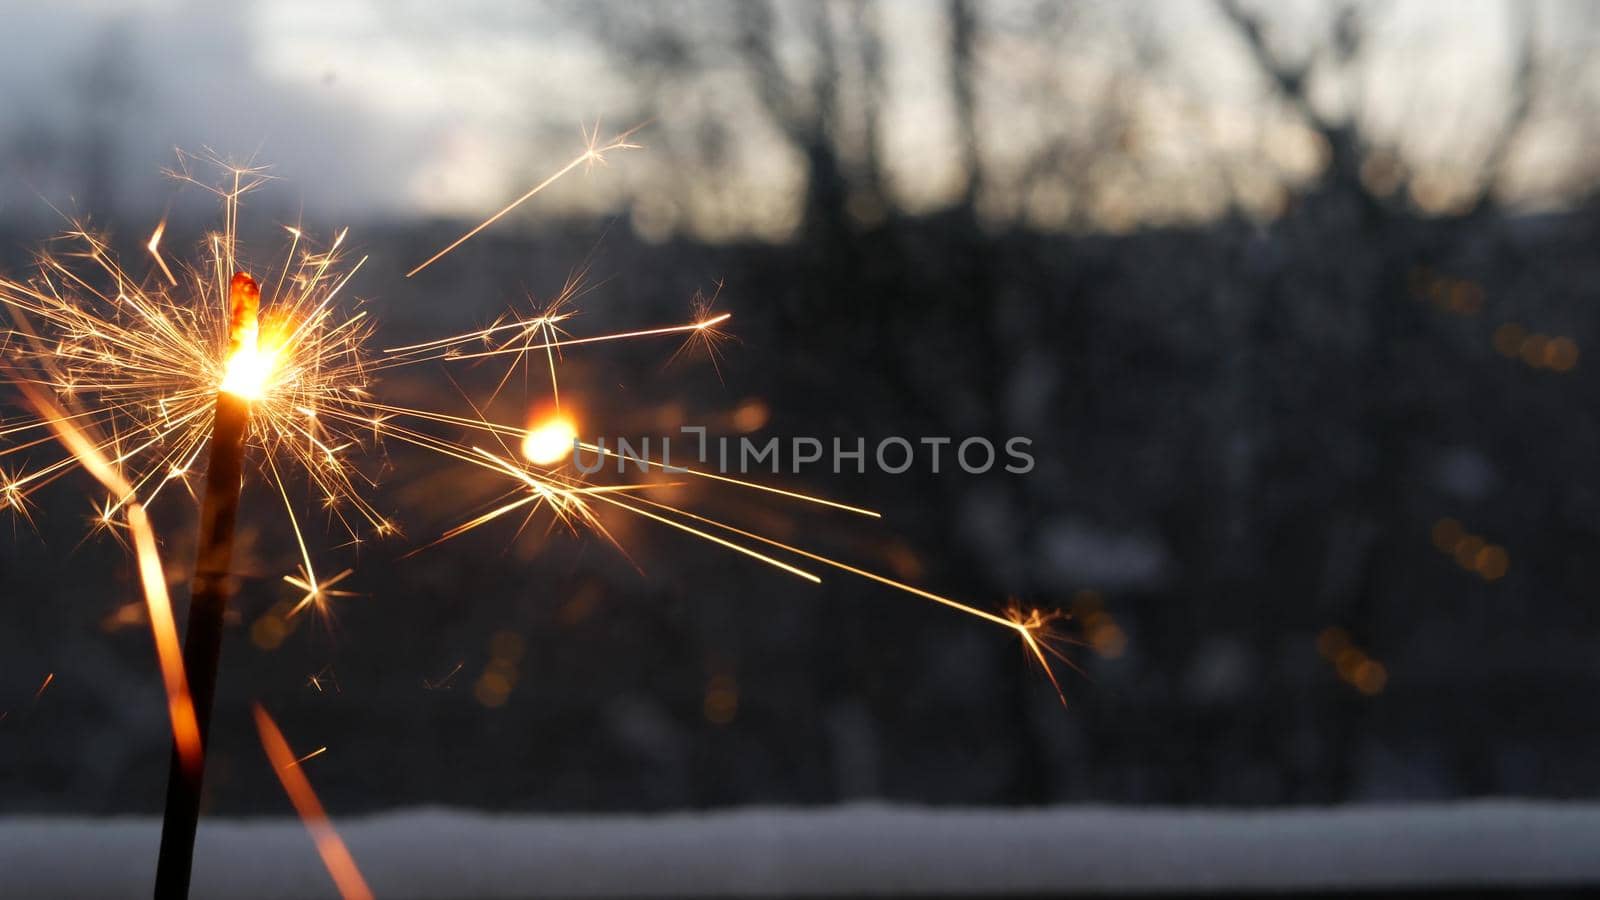 Sparkler firework burning on window, New Year or Christmas bengal lights. Winter Xmas holiday celebration magic, sparkles and golden fire stars light glowing in twilight of night.